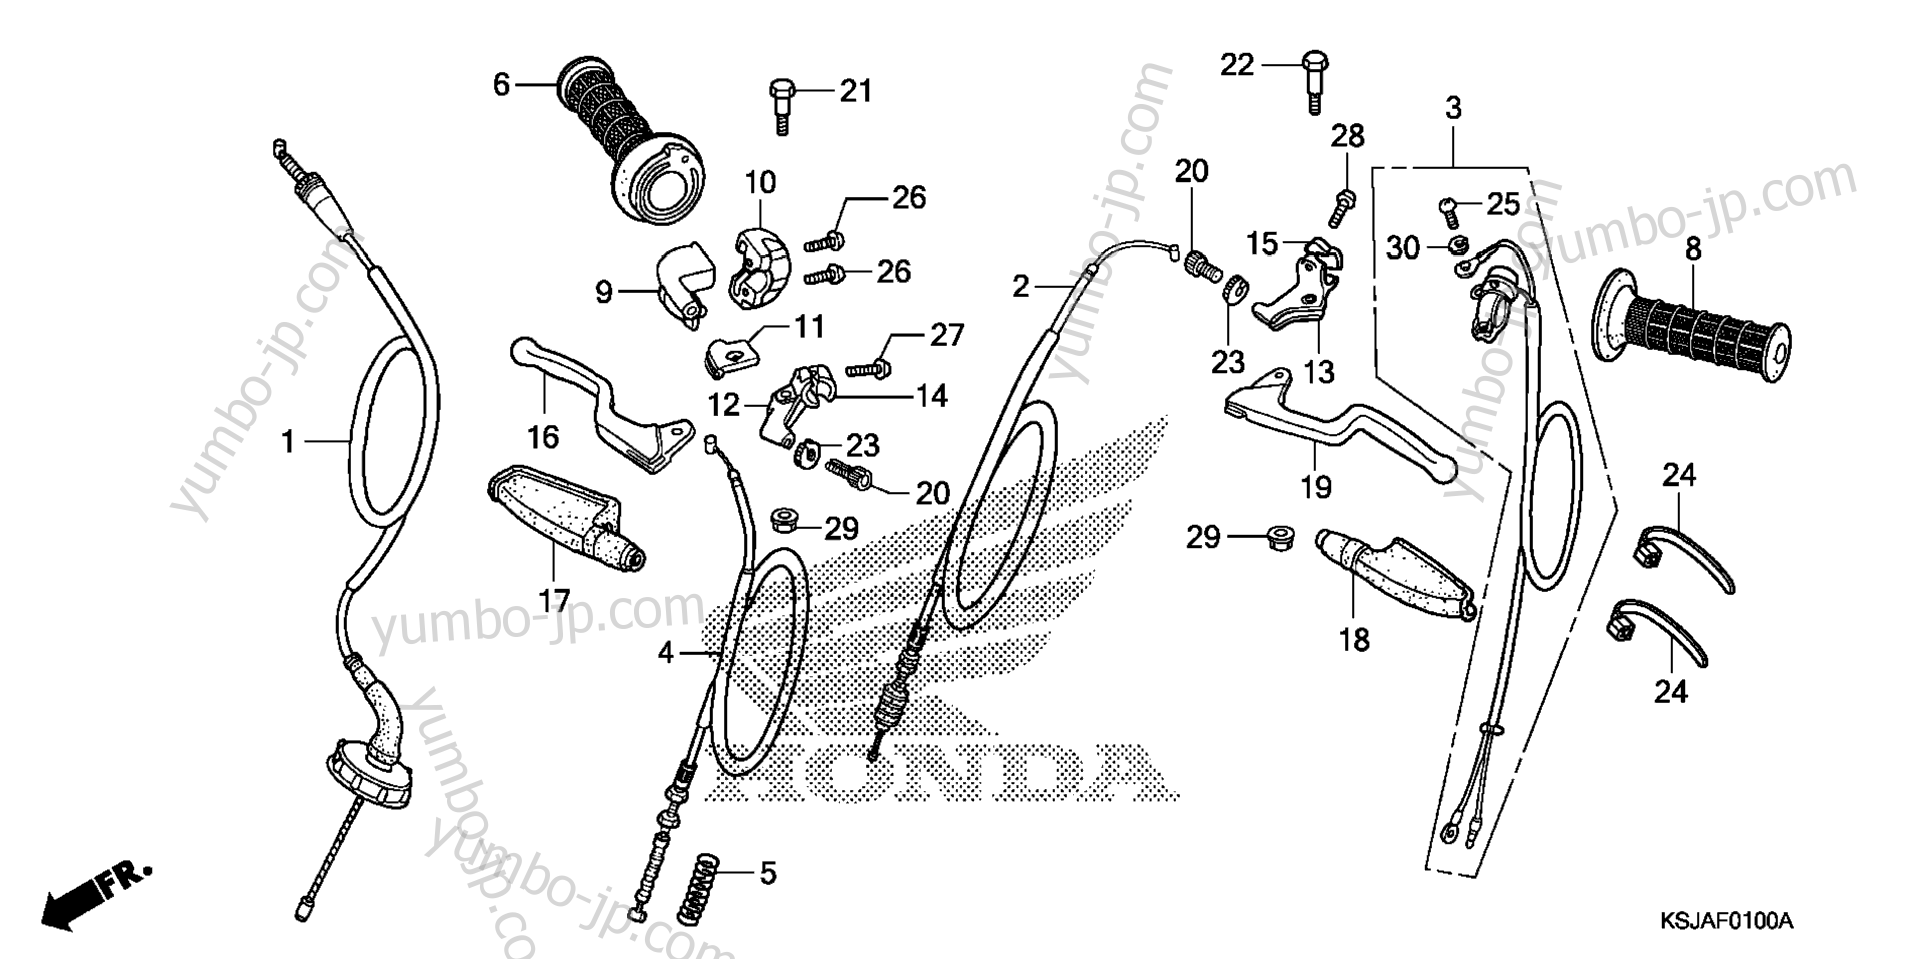 HANDLE LEVER / CABLE for motorcycles HONDA CRF80F A 2008 year